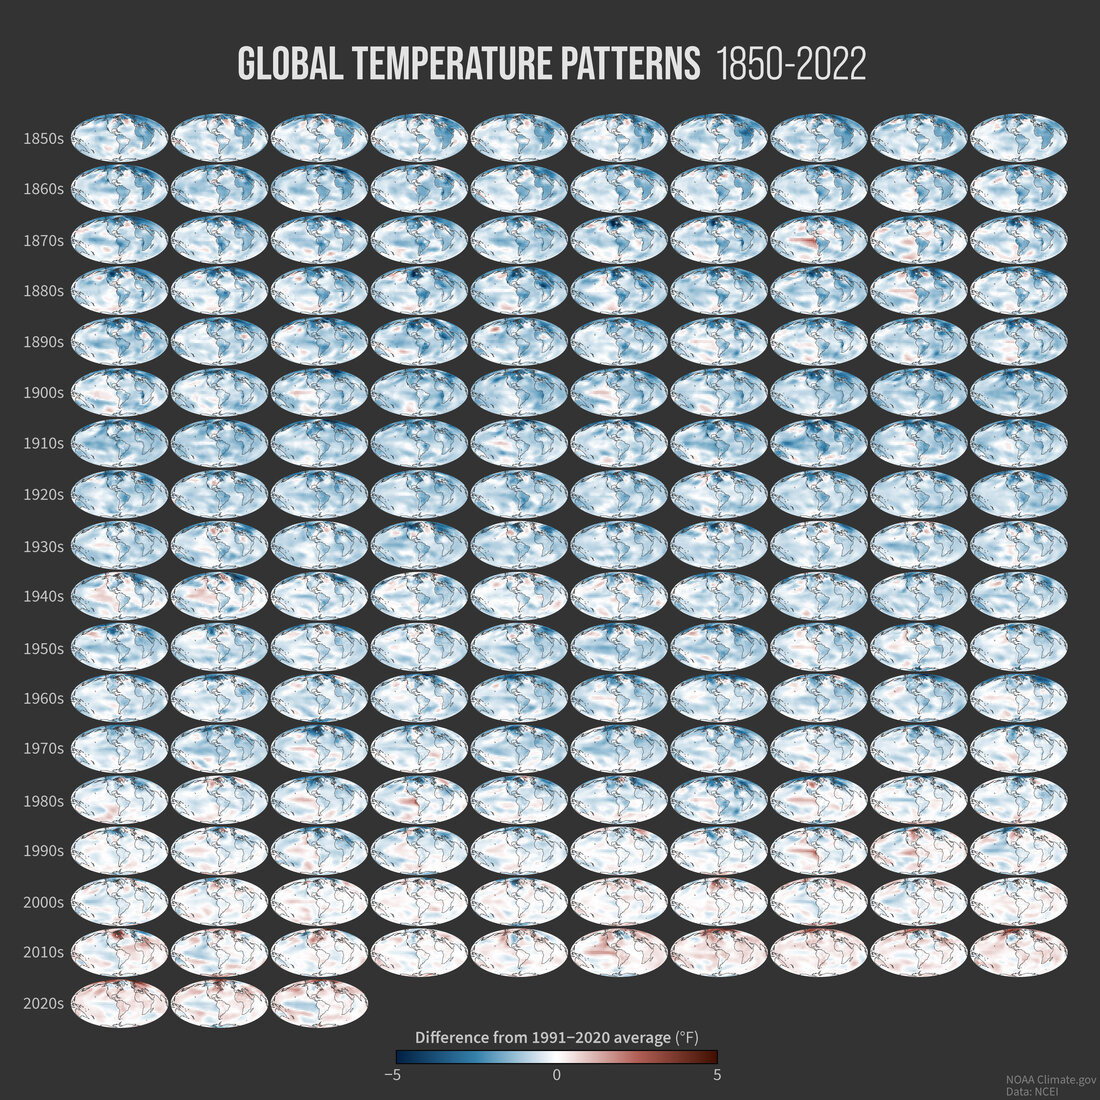 18 rows of small global maps of temperature patterns